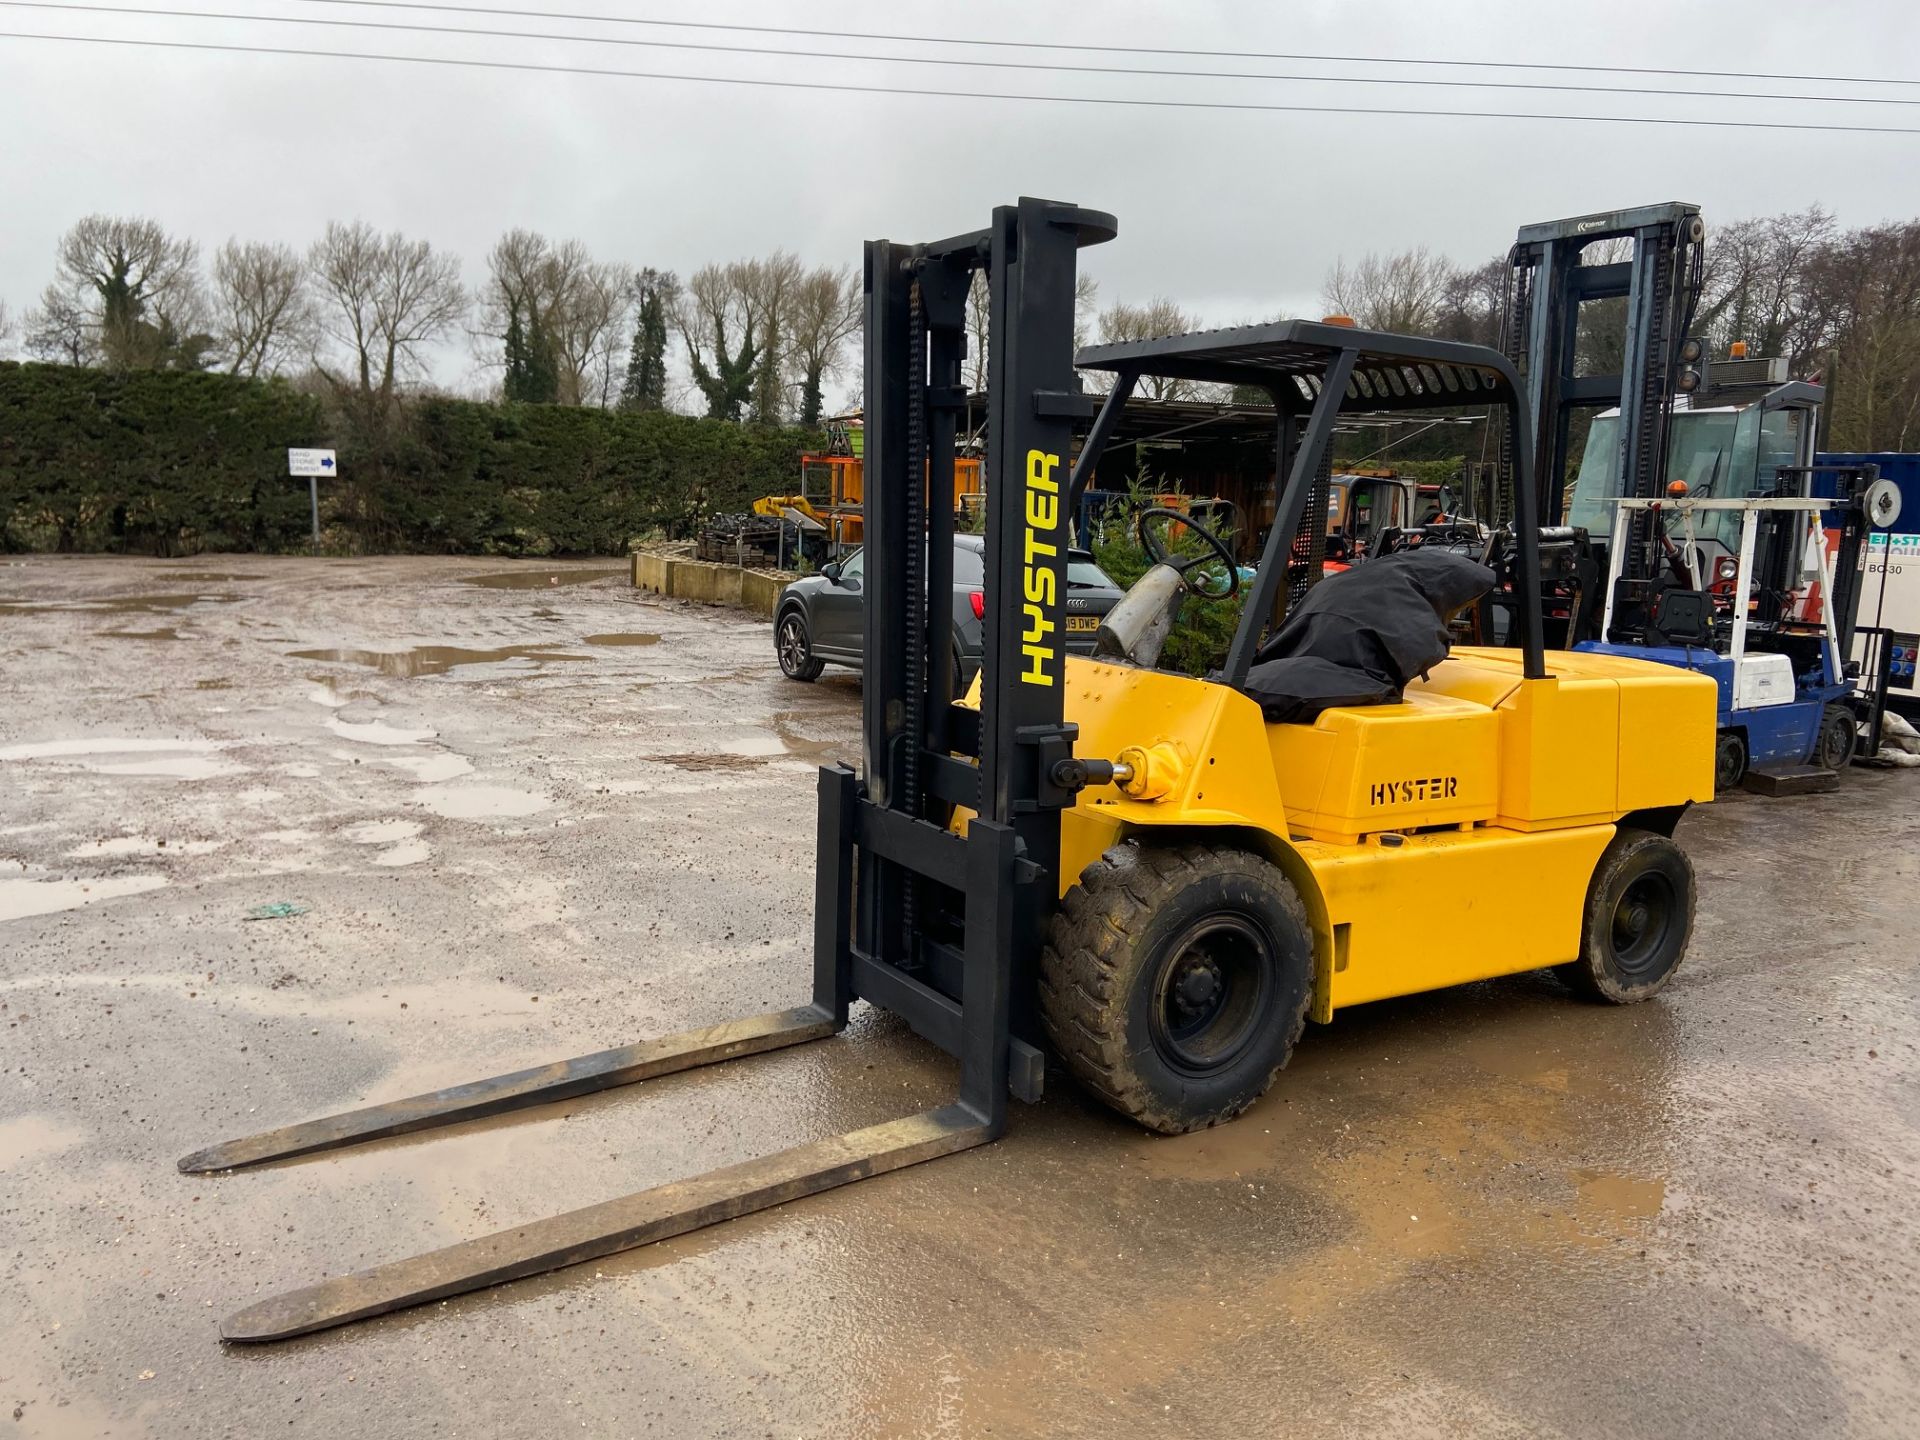 HYSTER H110 5 TON LIFT DIESEL FORKLIFT, PERKINS 4 CYLINDER ENGINE, OPERATES & WORKS AS IT SHOULD - Image 2 of 5